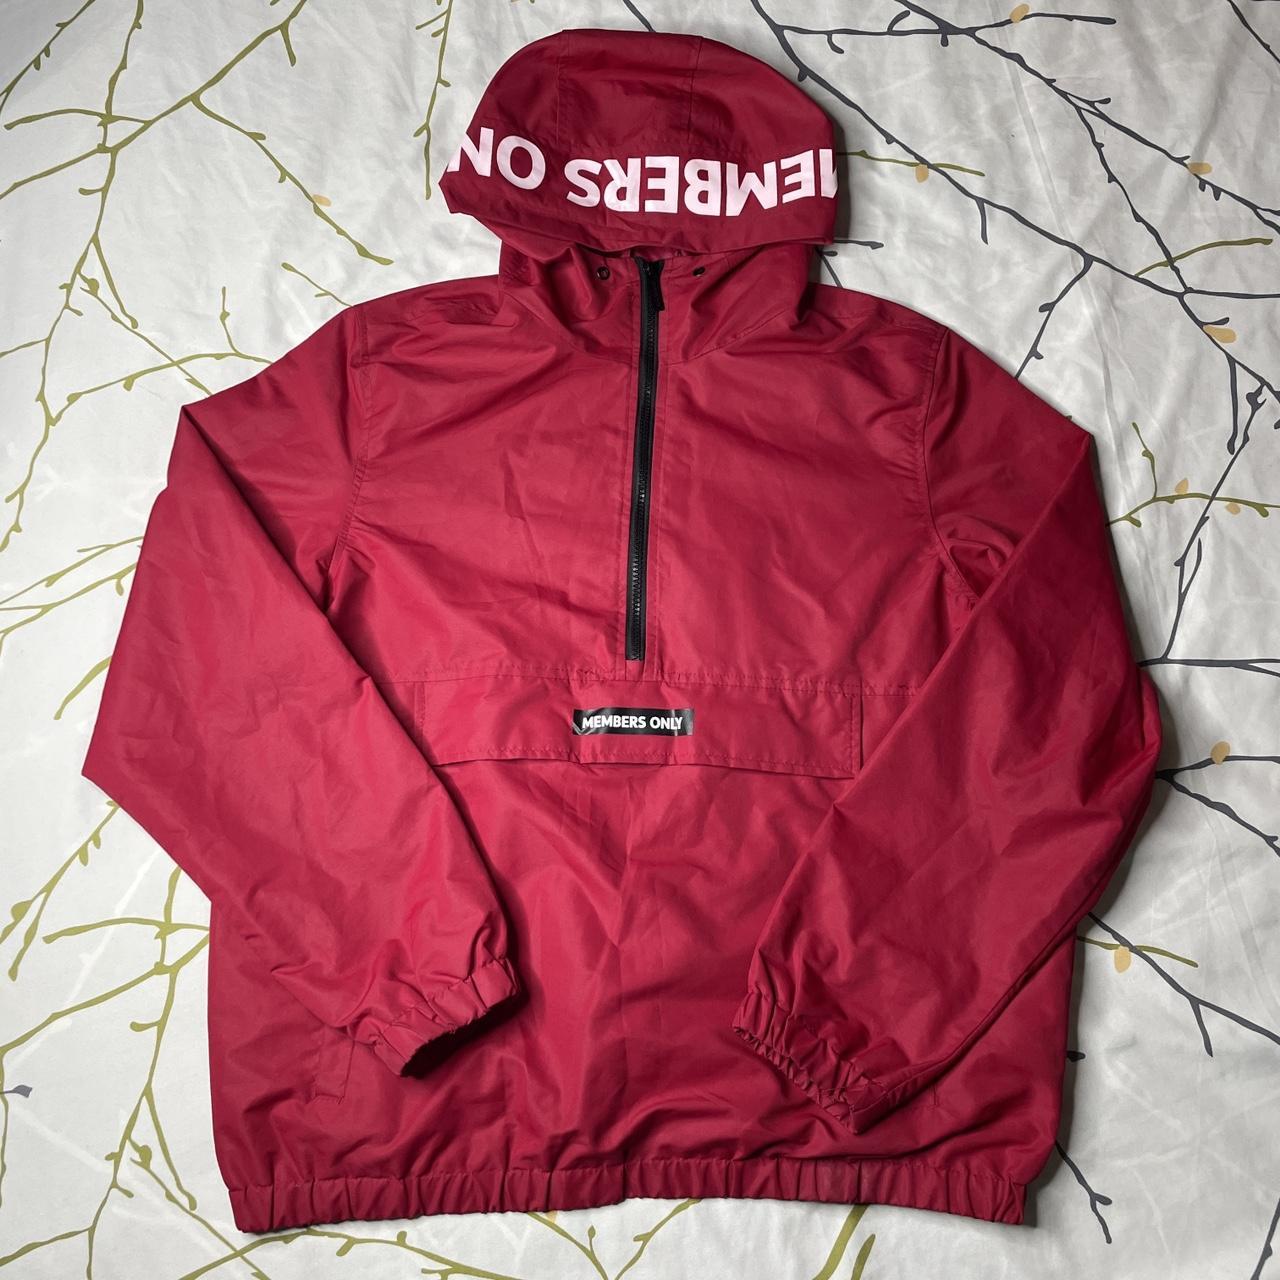 Members Only Men's Red Jacket